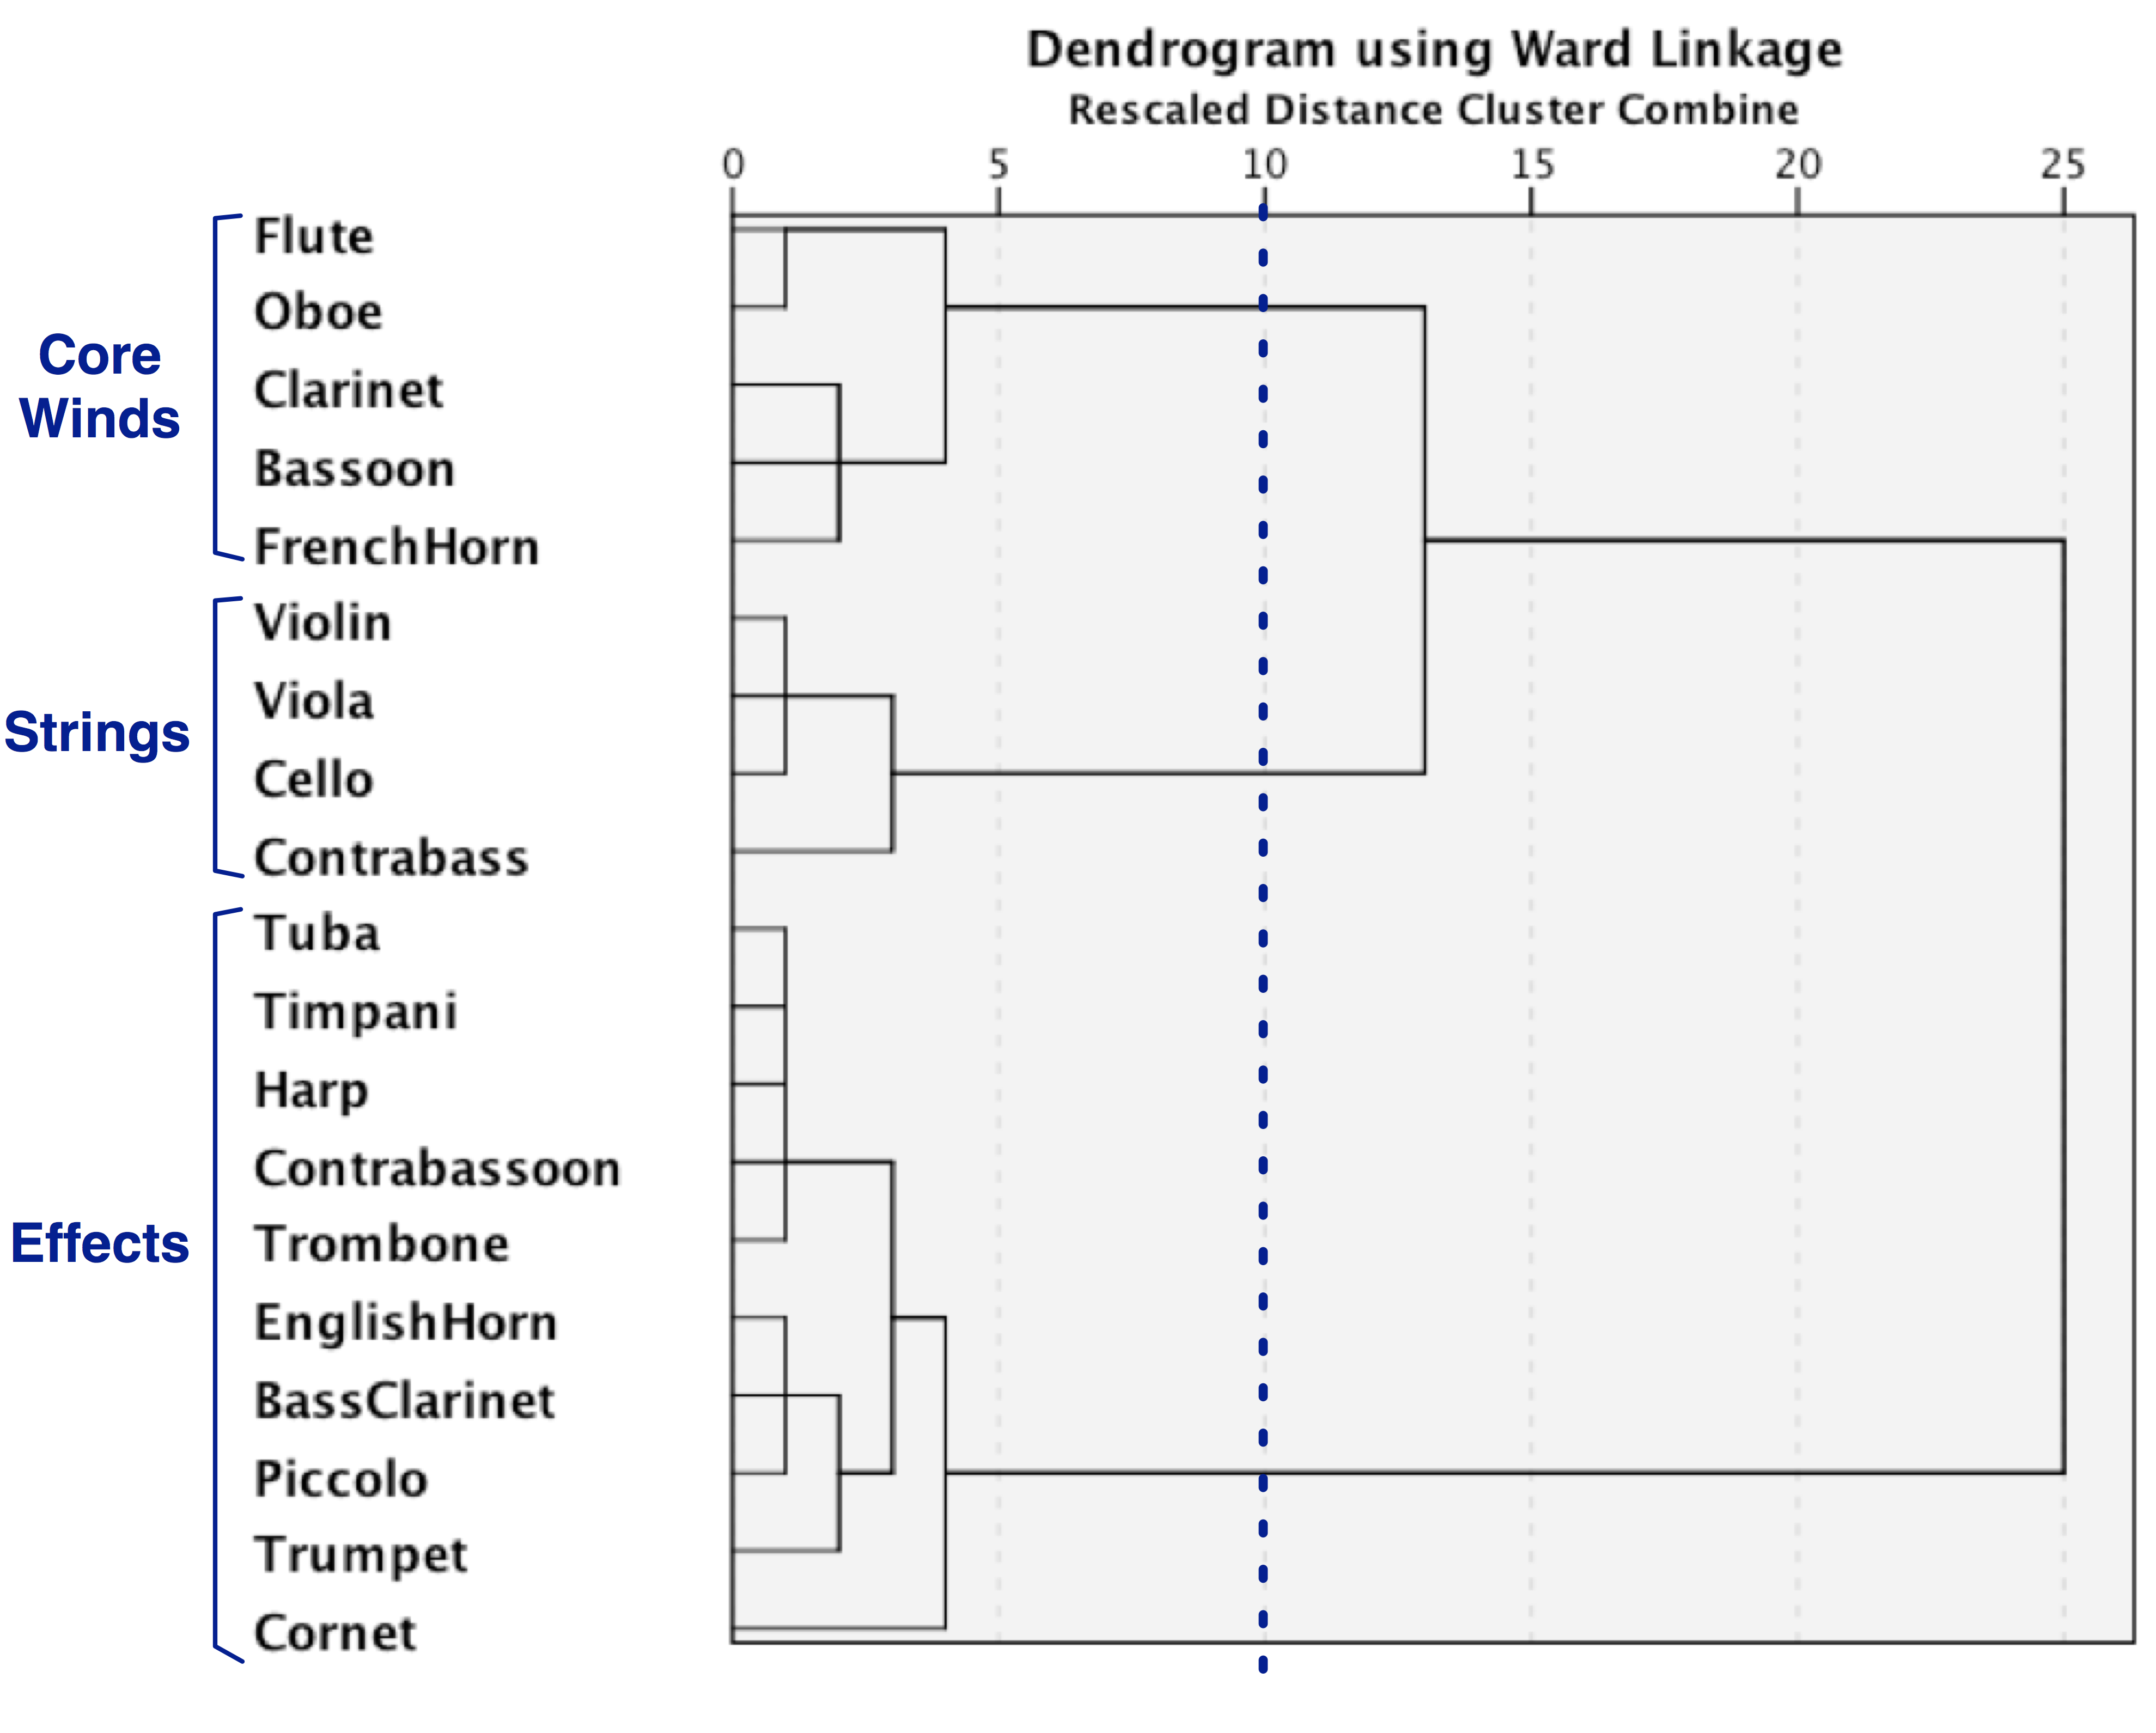 Figure 11 is a dendrogram using Ward Linkage showing hierarchical clustering of typical orchestral instruments in the 20th century